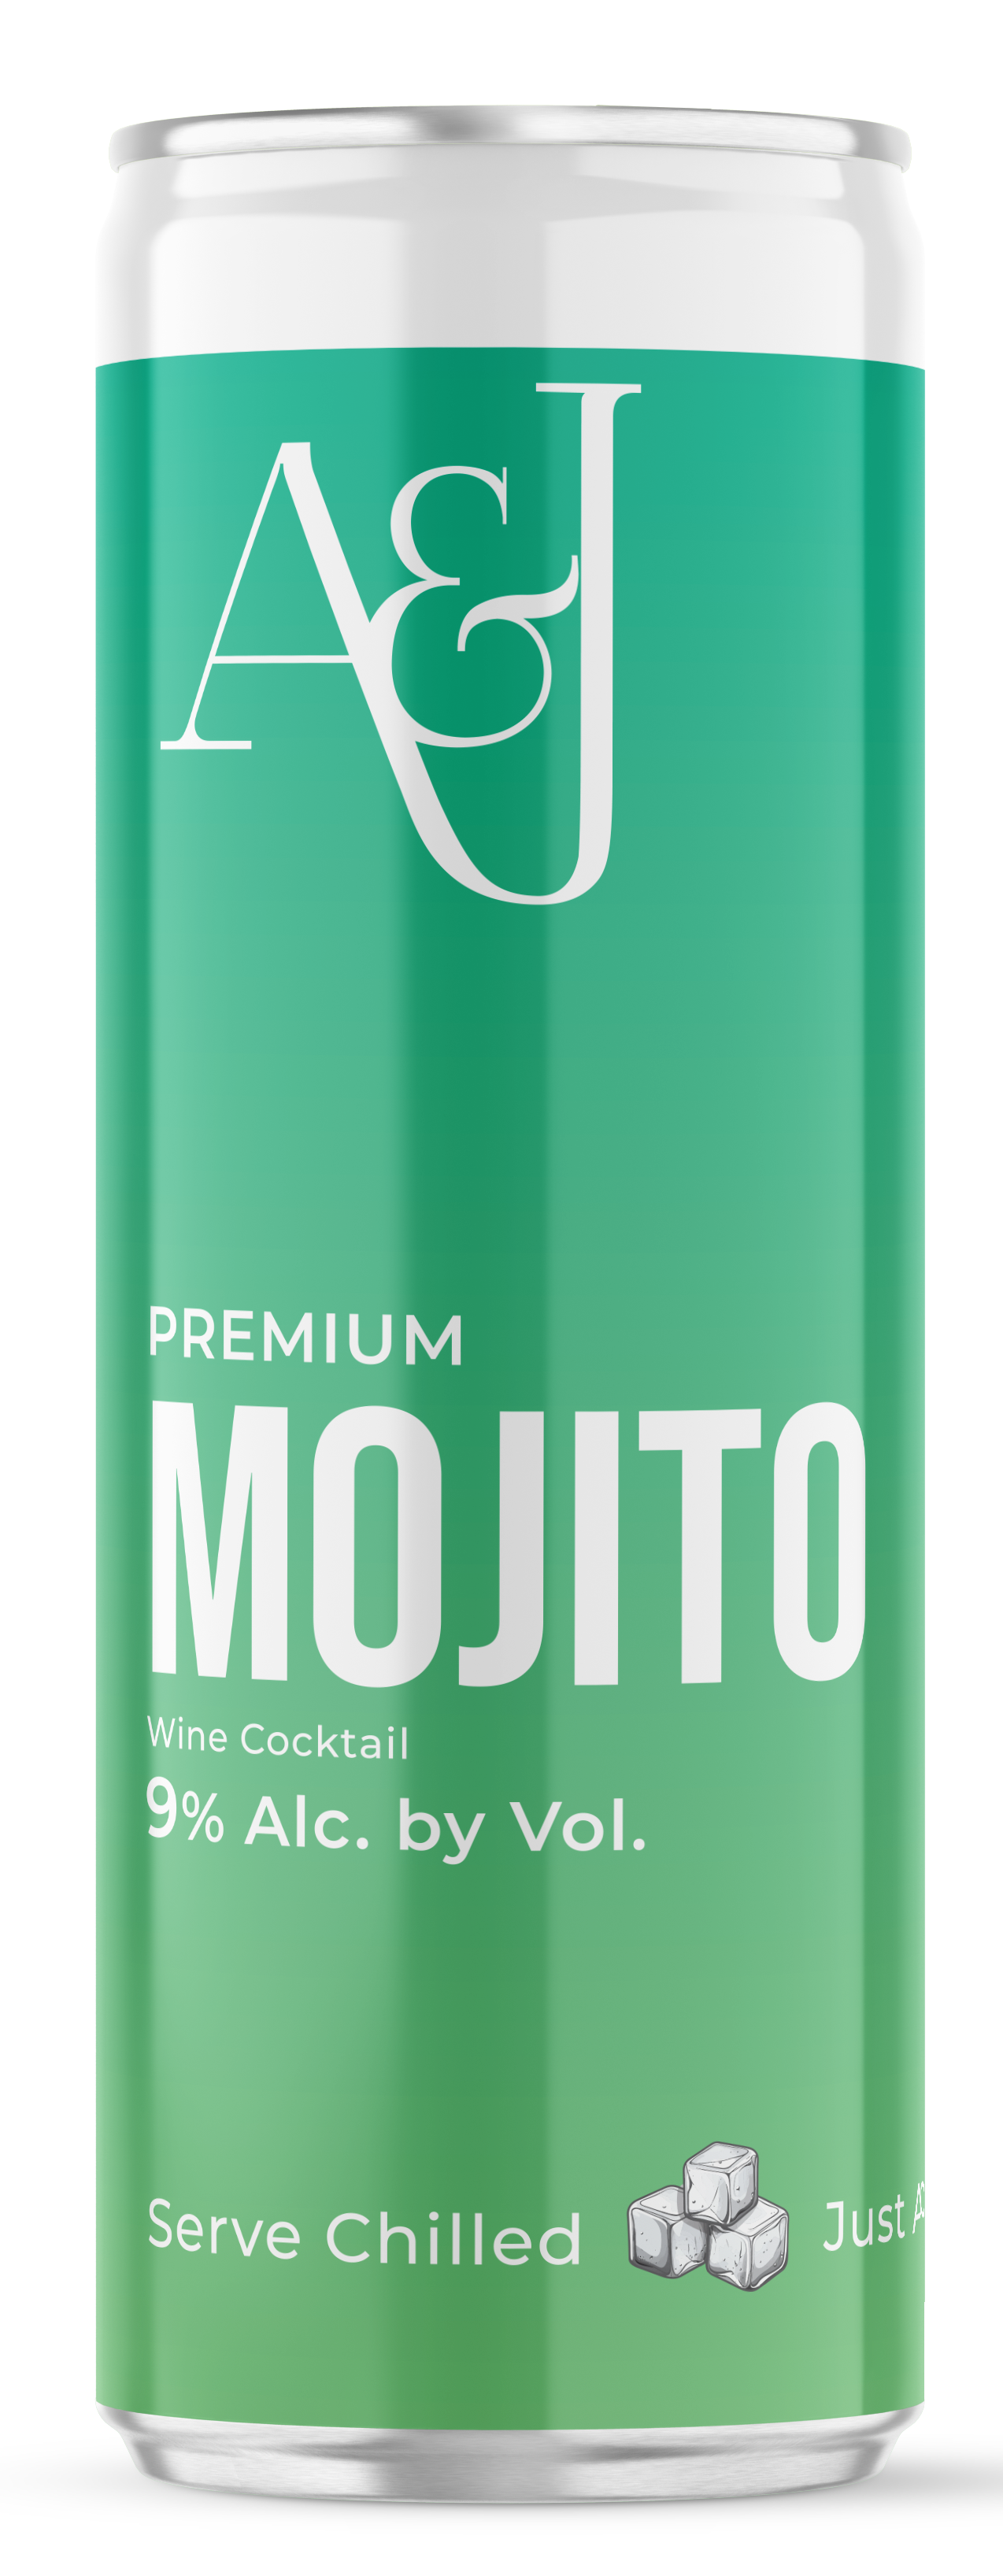 Product Image for MOJITO WINE COCKTAIL